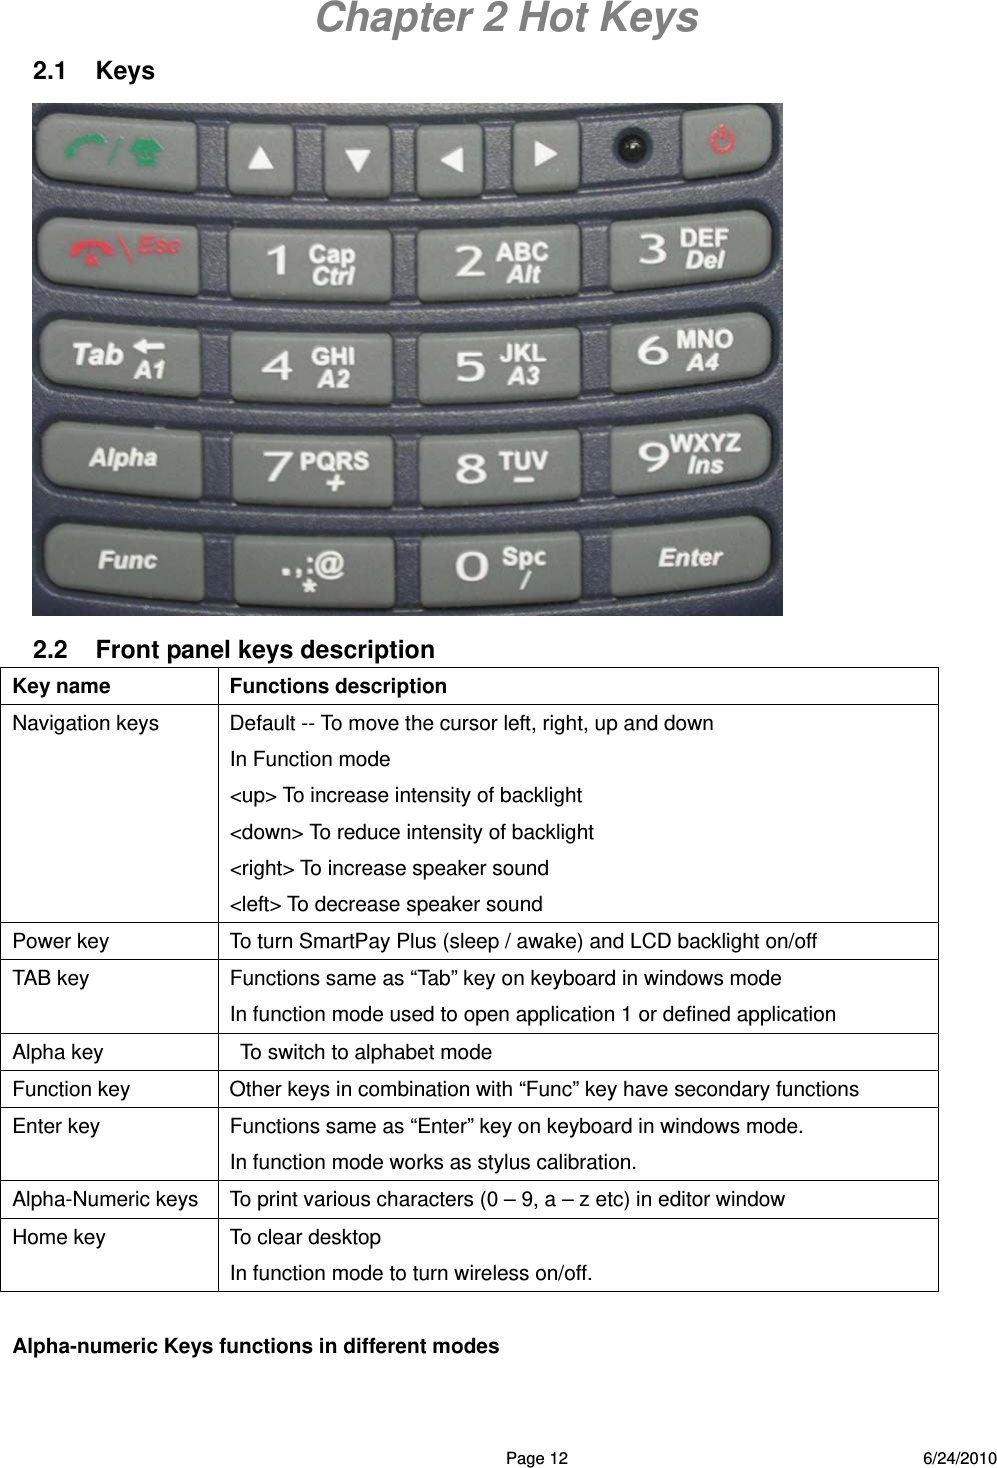  Page 12 6/24/2010 Chapter 2 Hot Keys 2.1 Keys  2.2  Front panel keys description   Key name  Functions description   Navigation keys  Default -- To move the cursor left, right, up and down In Function mode   &lt;up&gt; To increase intensity of backlight   &lt;down&gt; To reduce intensity of backlight &lt;right&gt; To increase speaker sound &lt;left&gt; To decrease speaker sound Power key    To turn SmartPay Plus (sleep / awake) and LCD backlight on/off TAB key    Functions same as “Tab” key on keyboard in windows mode In function mode used to open application 1 or defined application Alpha key        To switch to alphabet mode Function key      Other keys in combination with “Func” key have secondary functions     Enter key  Functions same as “Enter” key on keyboard in windows mode. In function mode works as stylus calibration. Alpha-Numeric keys  To print various characters (0 – 9, a – z etc) in editor window Home key  To clear desktop In function mode to turn wireless on/off.  Alpha-numeric Keys functions in different modes    